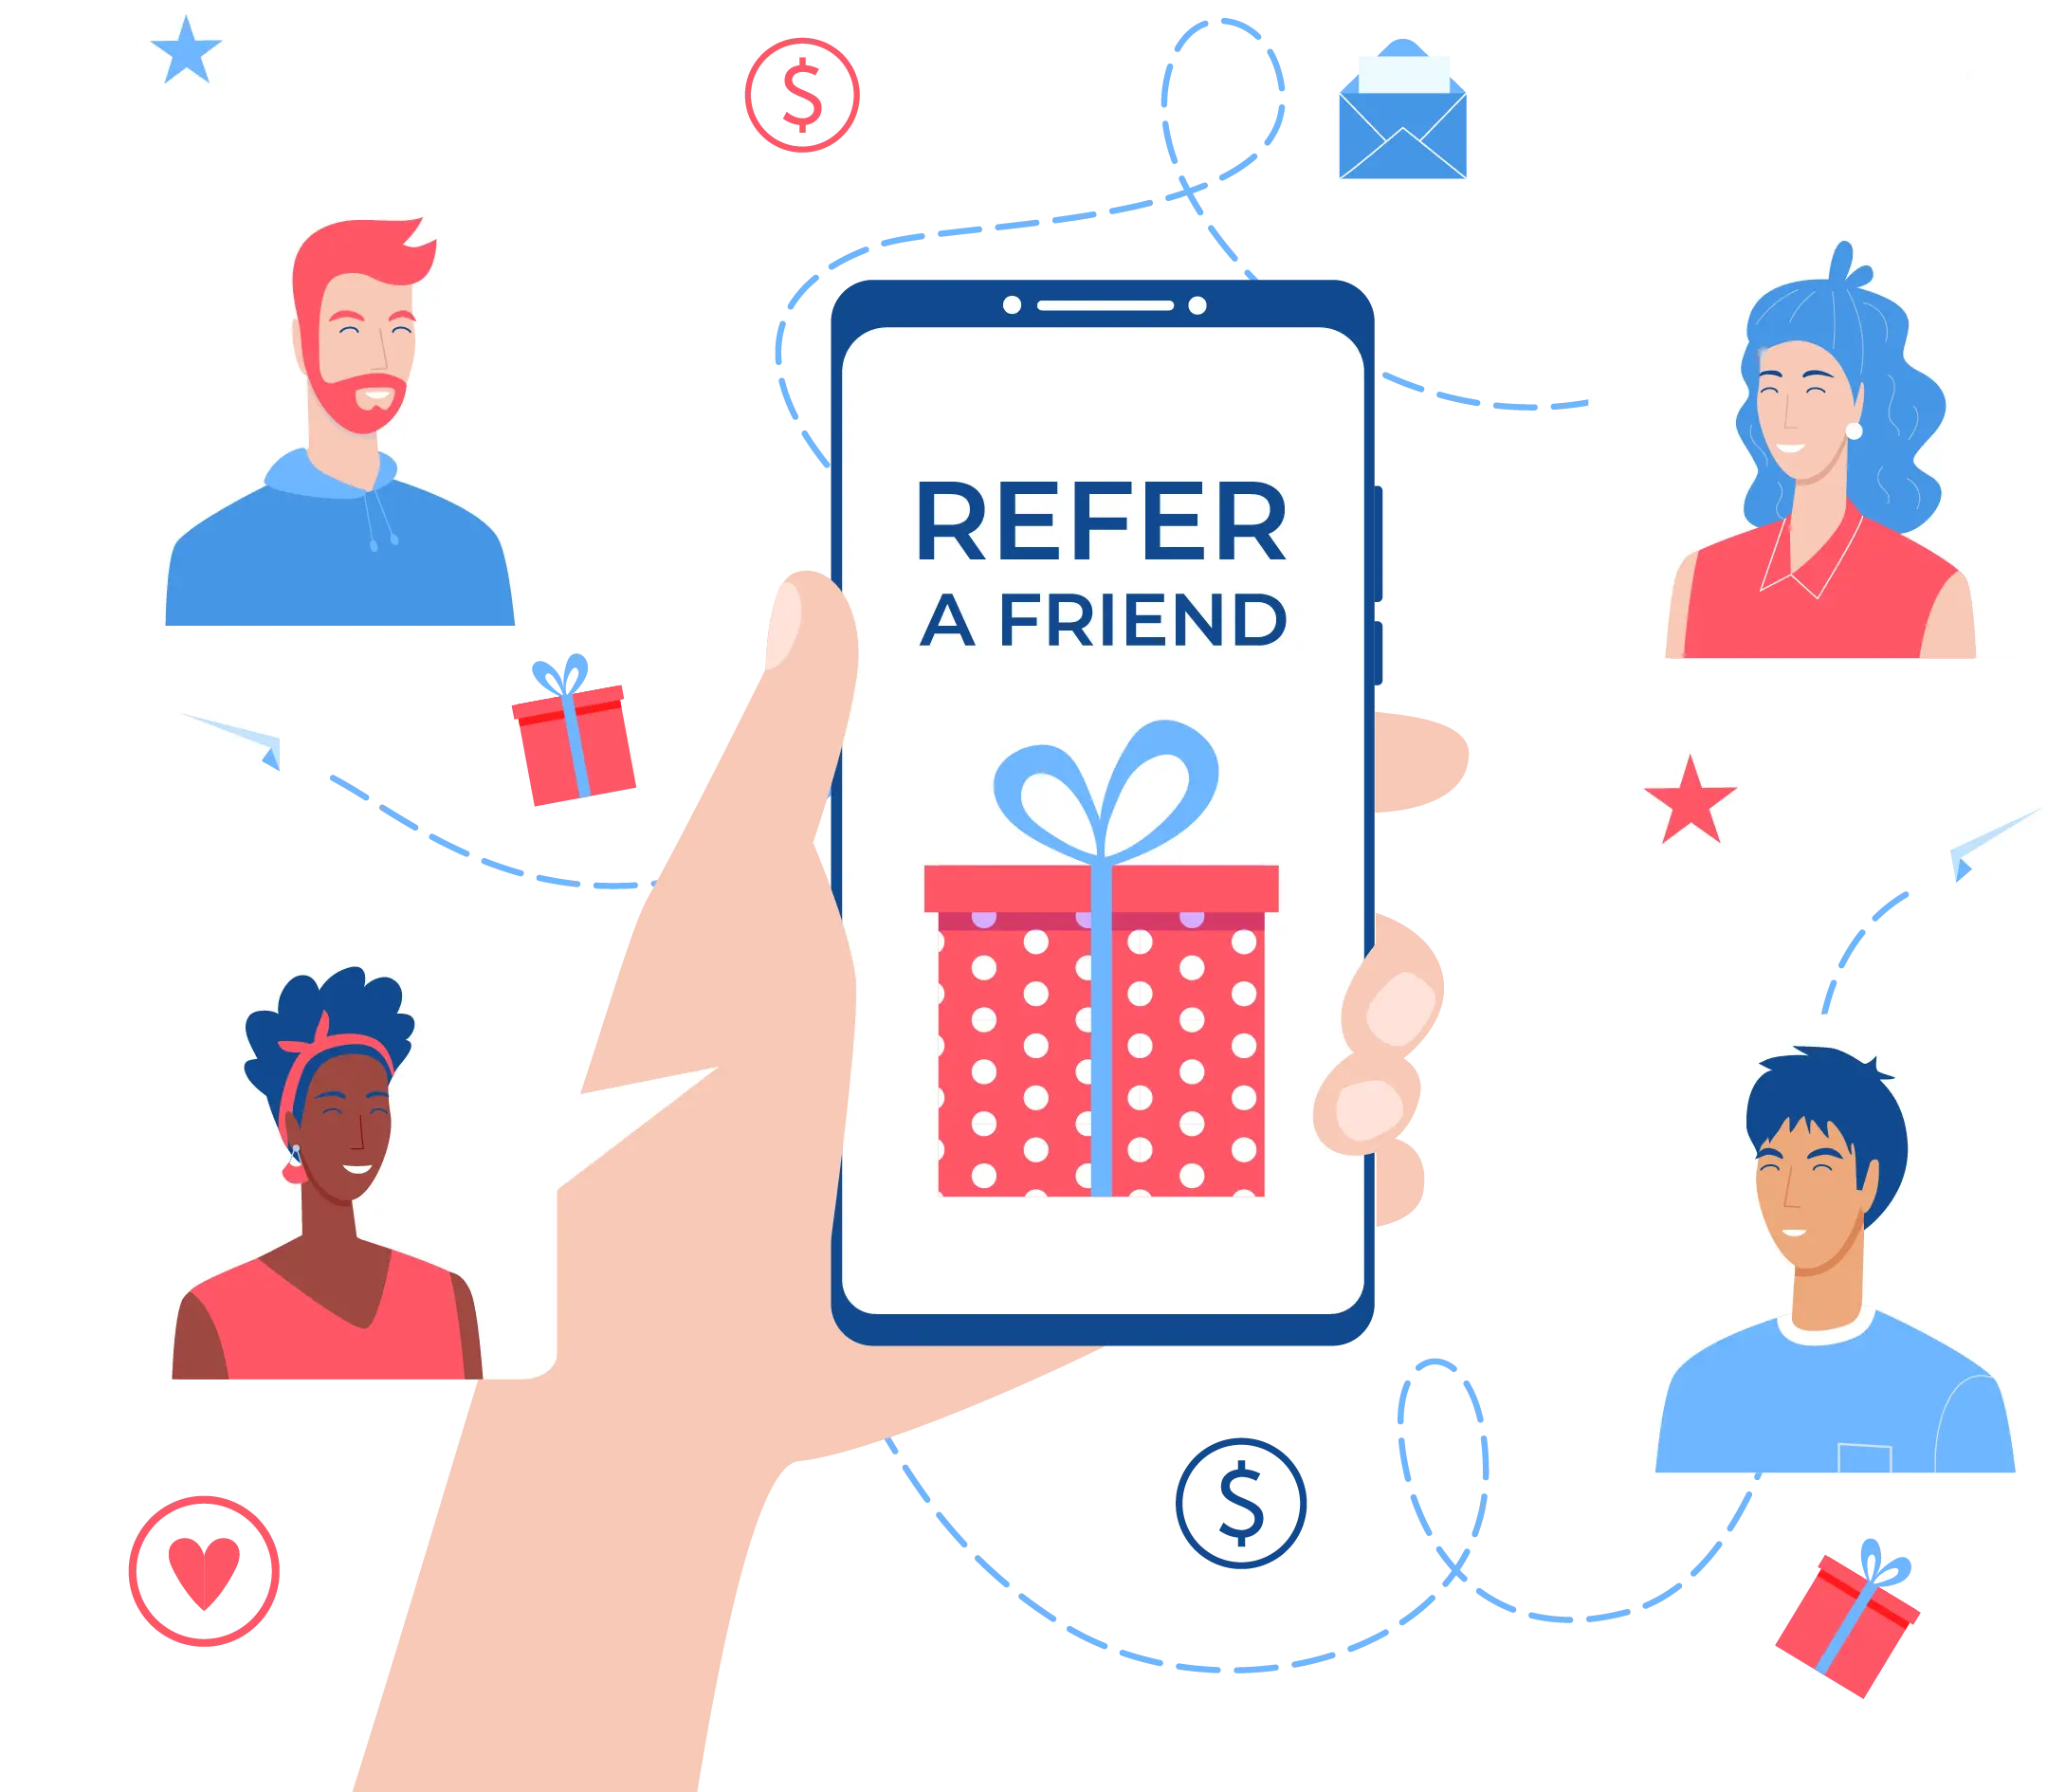 Become A Top Referrer And Earn Bonuses For Referring Friends